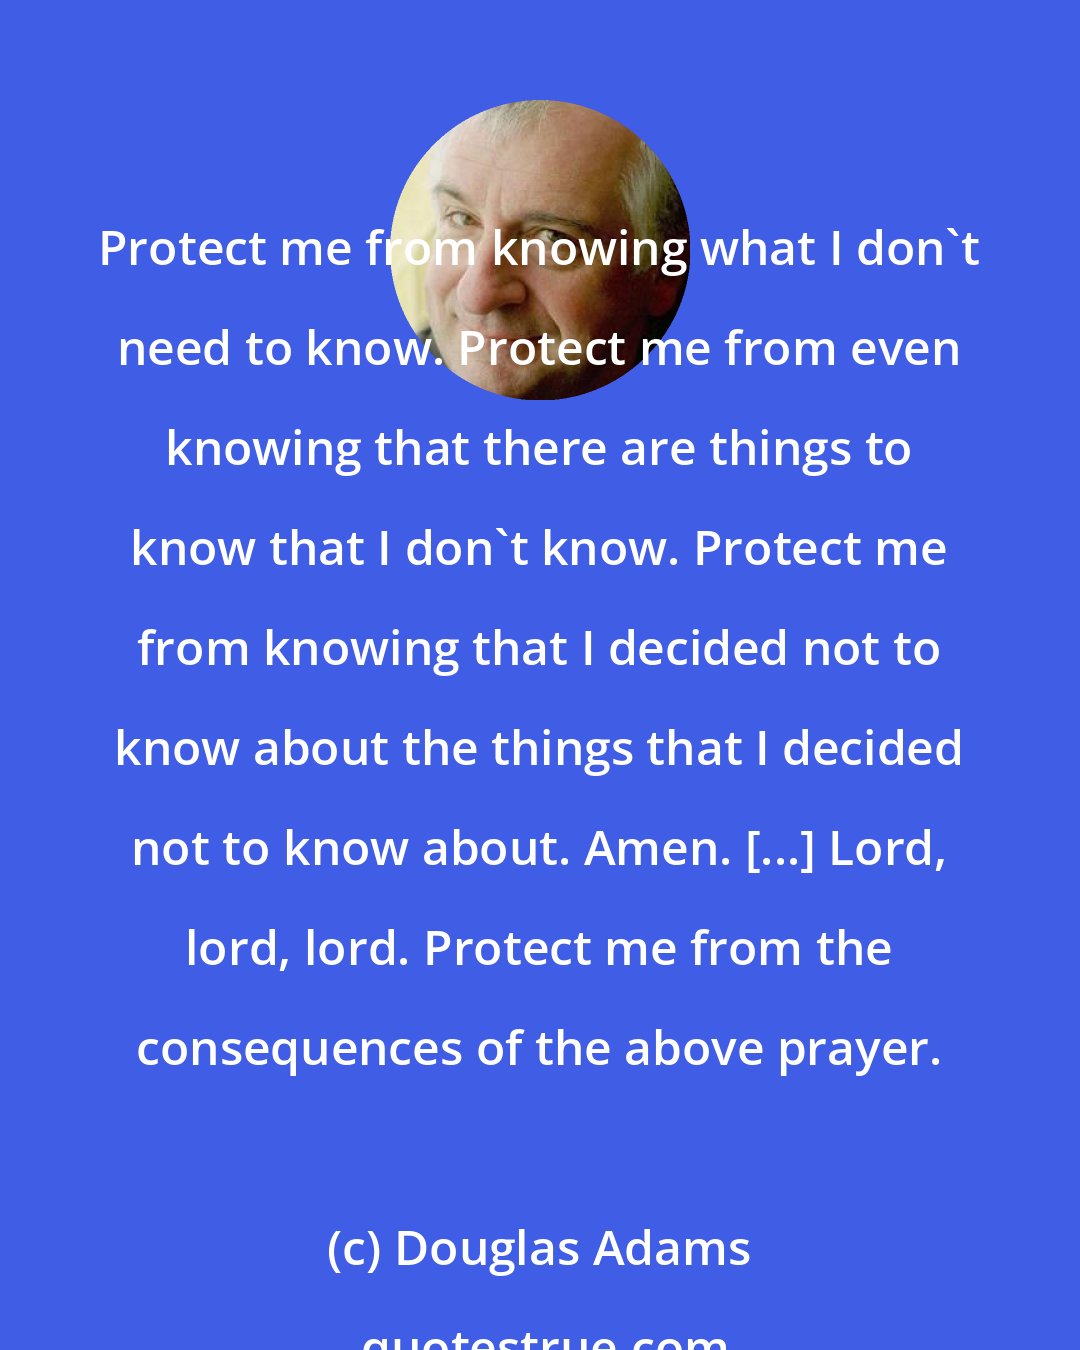 Douglas Adams: Protect me from knowing what I don't need to know. Protect me from even knowing that there are things to know that I don't know. Protect me from knowing that I decided not to know about the things that I decided not to know about. Amen. [...] Lord, lord, lord. Protect me from the consequences of the above prayer.